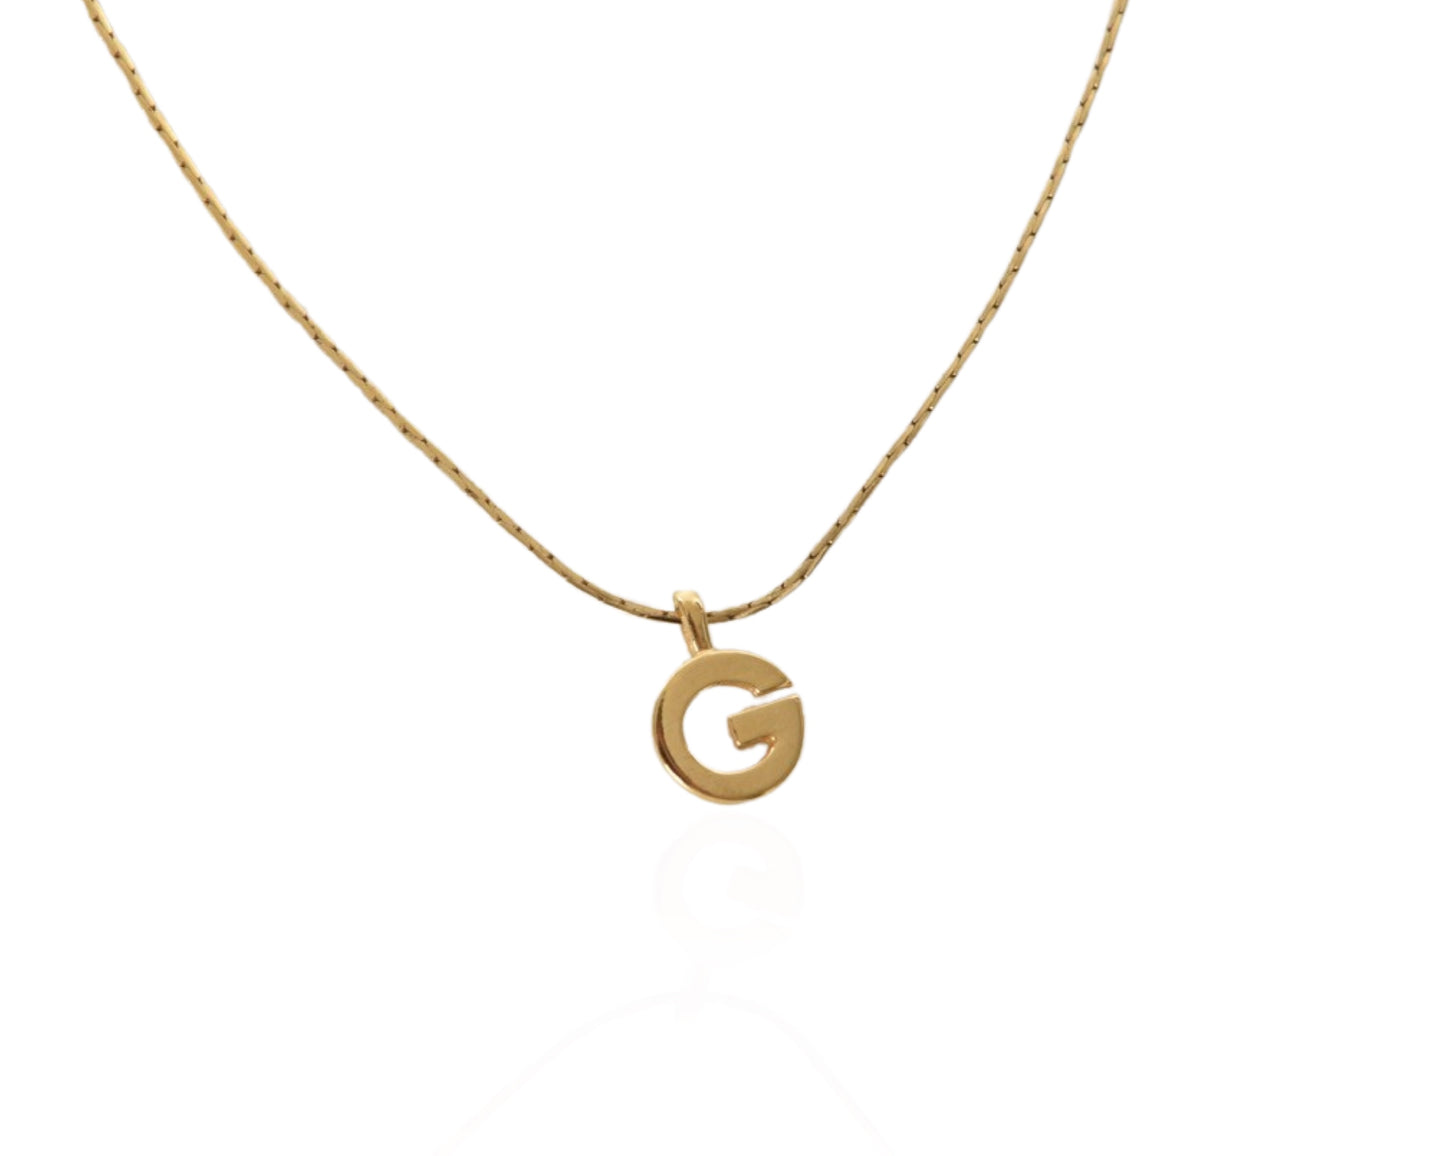 Givenchy Gold Colored Metal Necklace Vintage